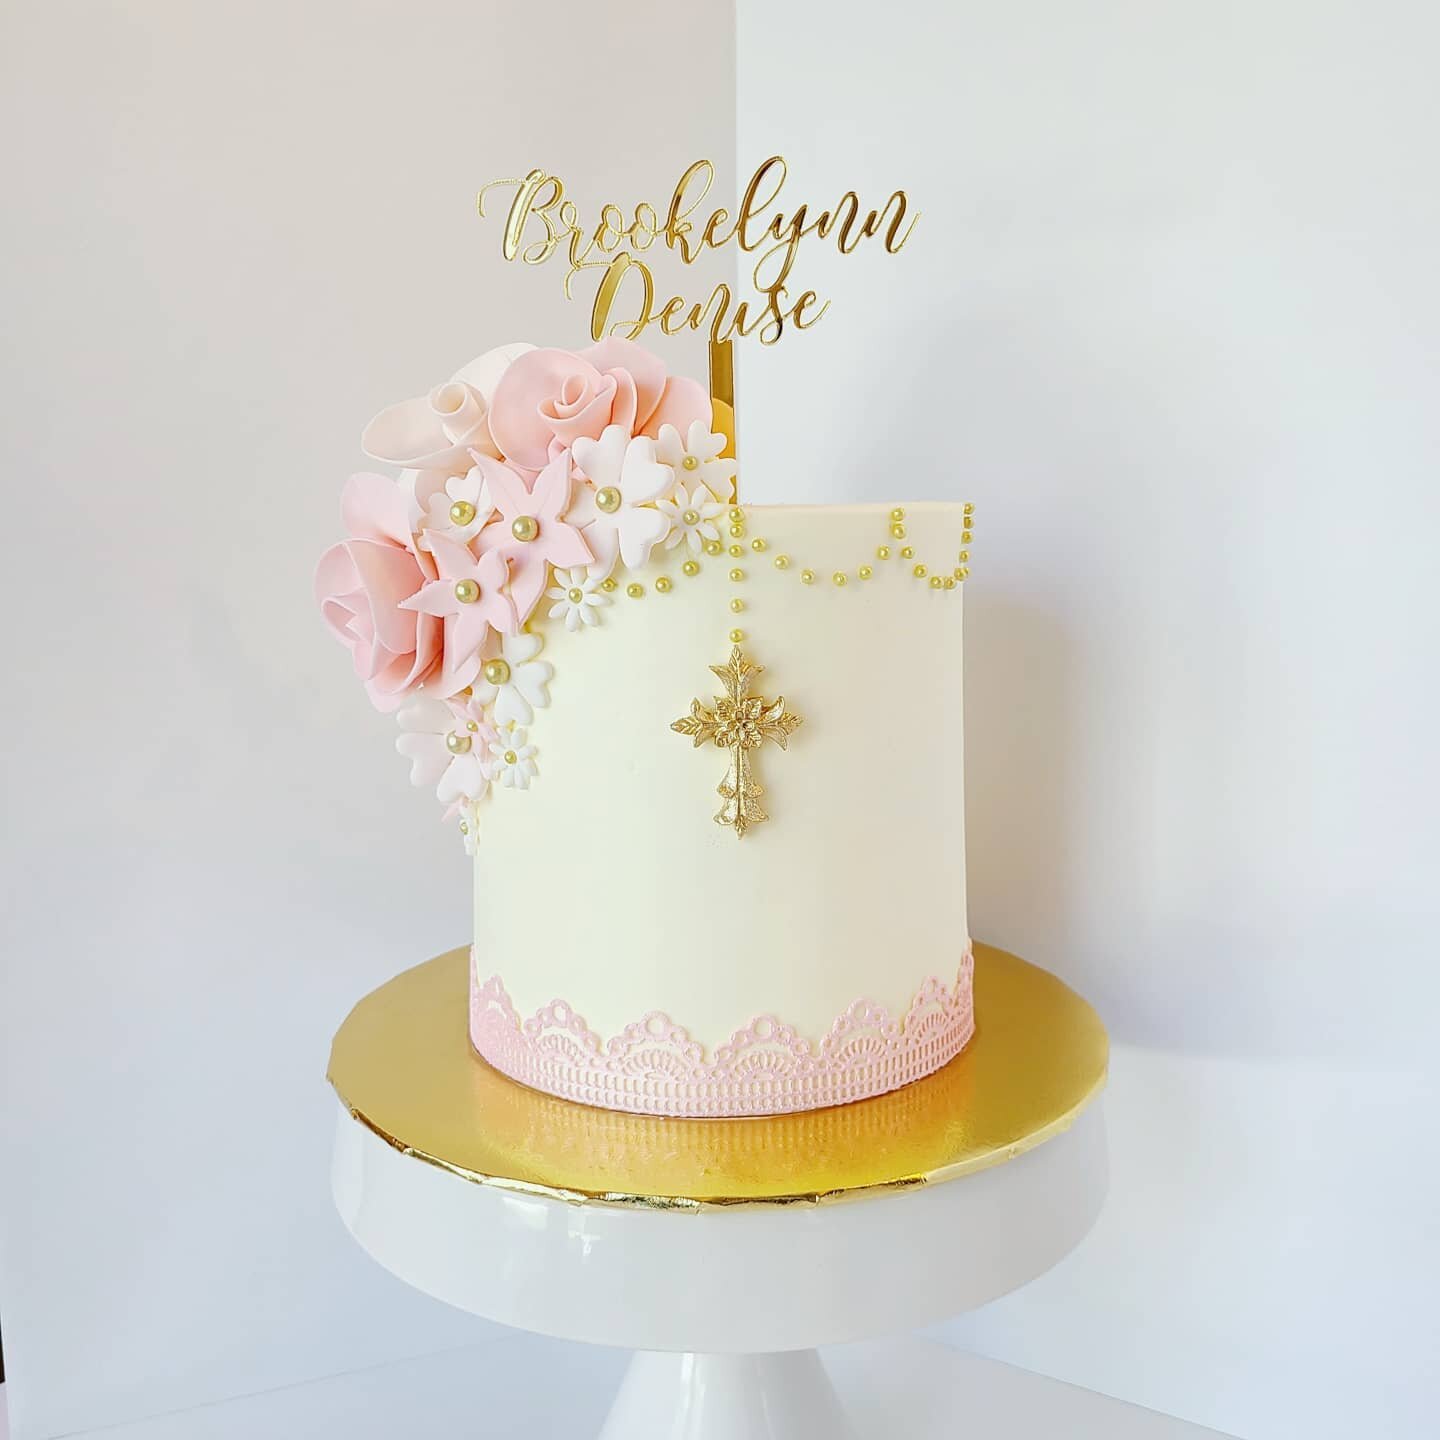 Pretty in pink for a sweet girl's special day💖
Topper from @papayaplum
Flower cutters from @nycake
💖
💖
#communioncake #cakelove #cakestyling #cakeart #gumpasteflowers #prettycake #prettyyummythings #smooth #ediblelace #nj #nyc #njcake #nycake #fir